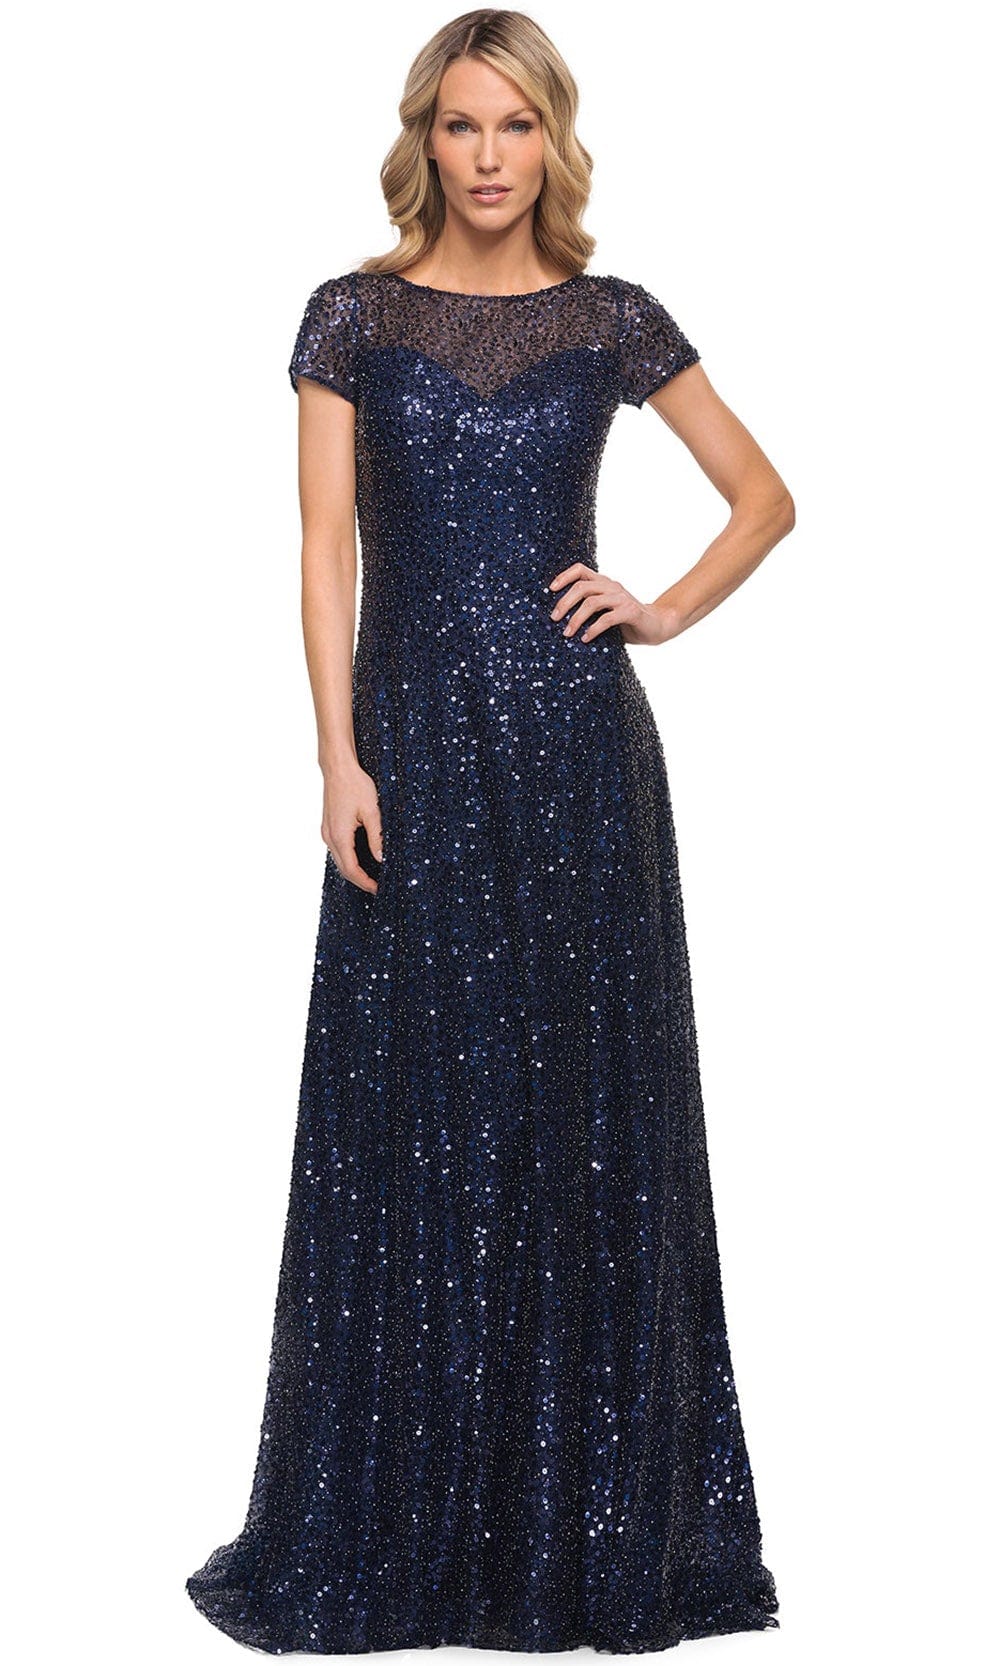 Image of La Femme 30122 - Glimmering Short Sleeve Beaded Gown